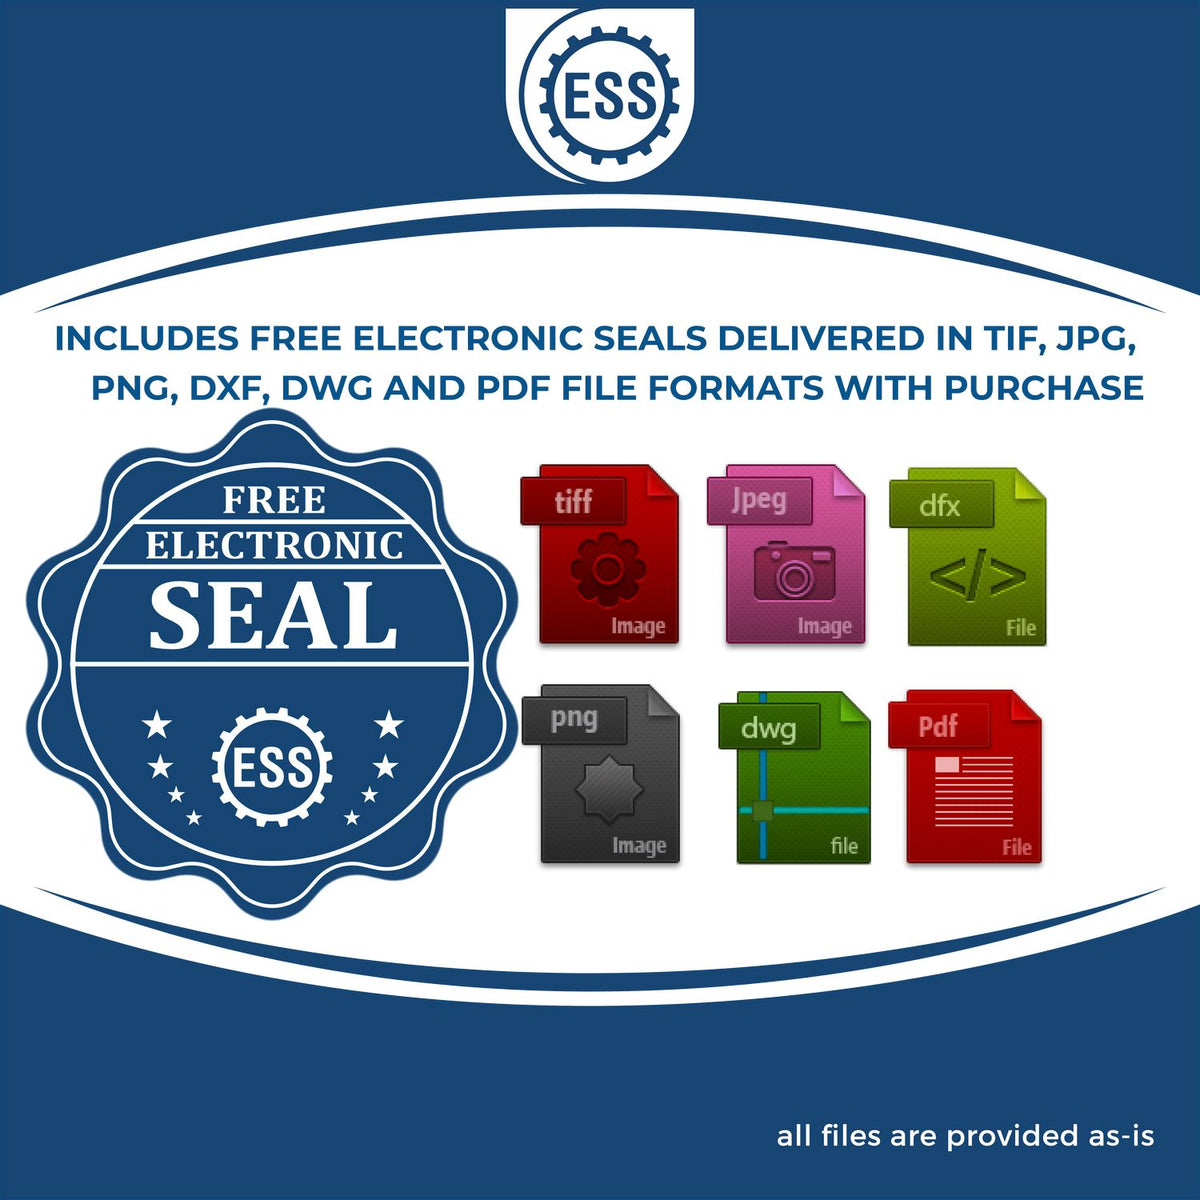 An infographic for the free electronic seal for the Handheld Florida Professional Geologist Embosser illustrating the different file type icons such as DXF, DWG, TIF, JPG and PNG.